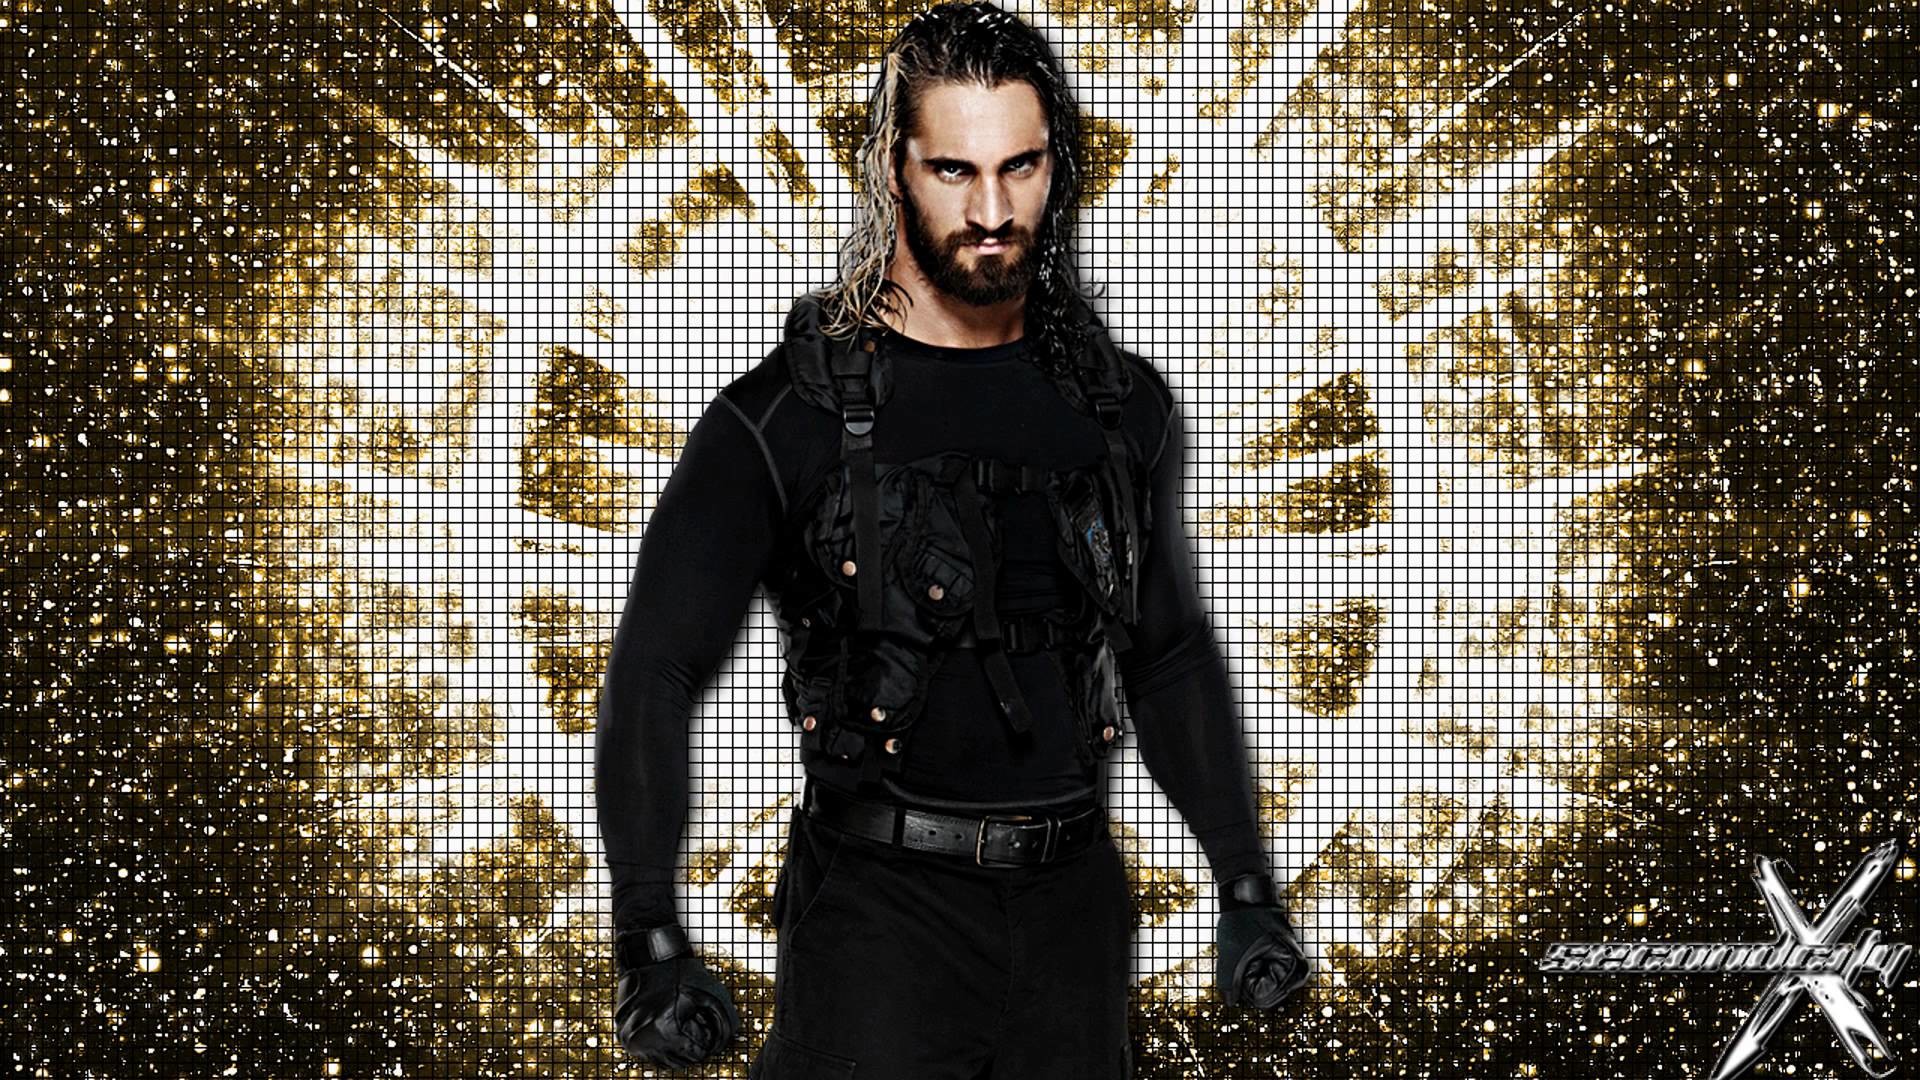 1920x1080 wwe superstars images Seth Rollins HD wallpaper and background .